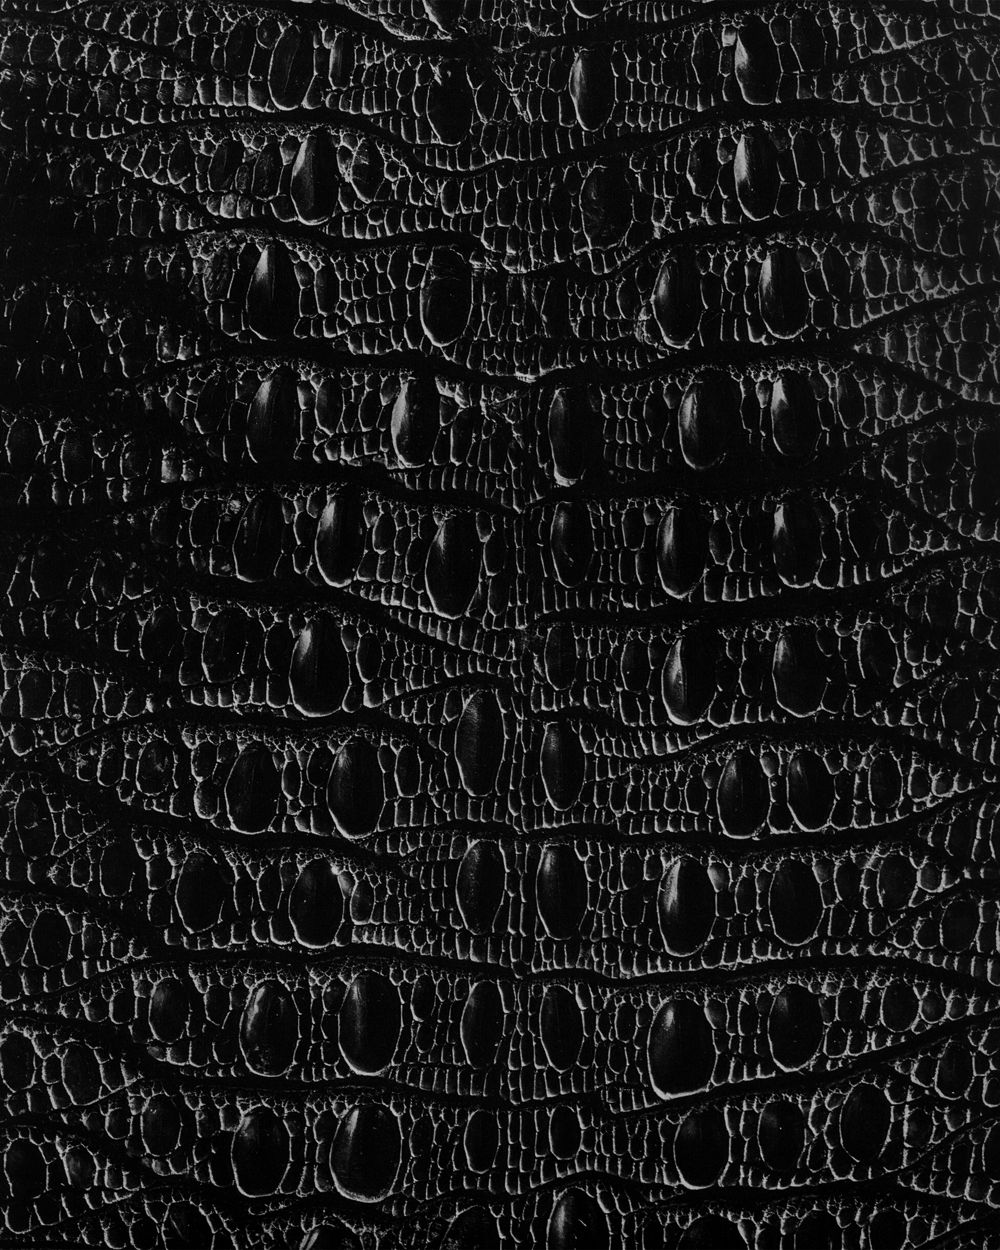 D10 Crocodile Skin uploaded by LordBruno on Tuesday March 04 2008 1000x1250